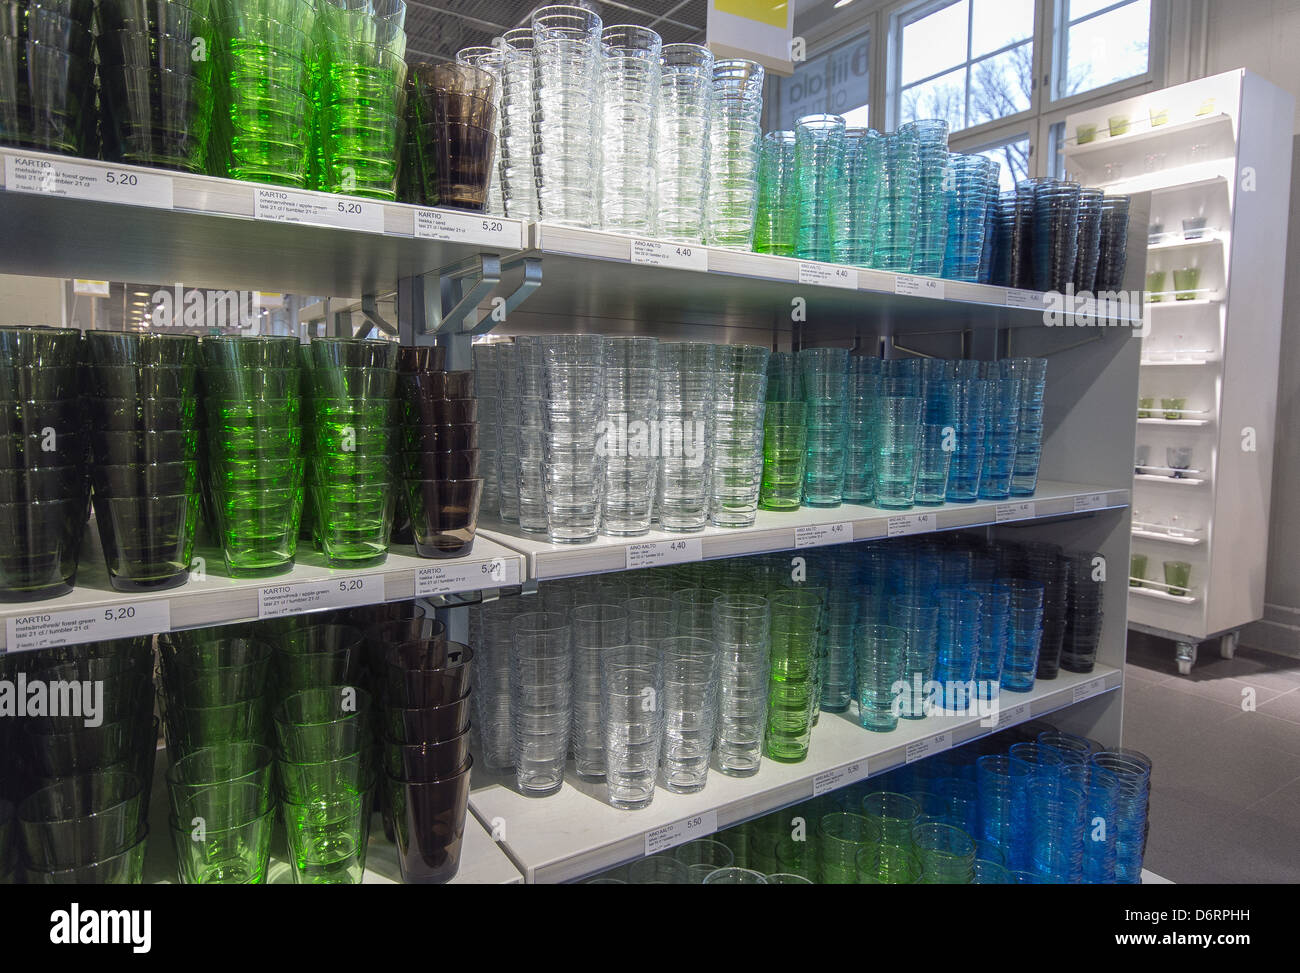 Display of glassware in the Iittala outlet store at the Arabia factory building in Helsinki, Finland Stock Photo